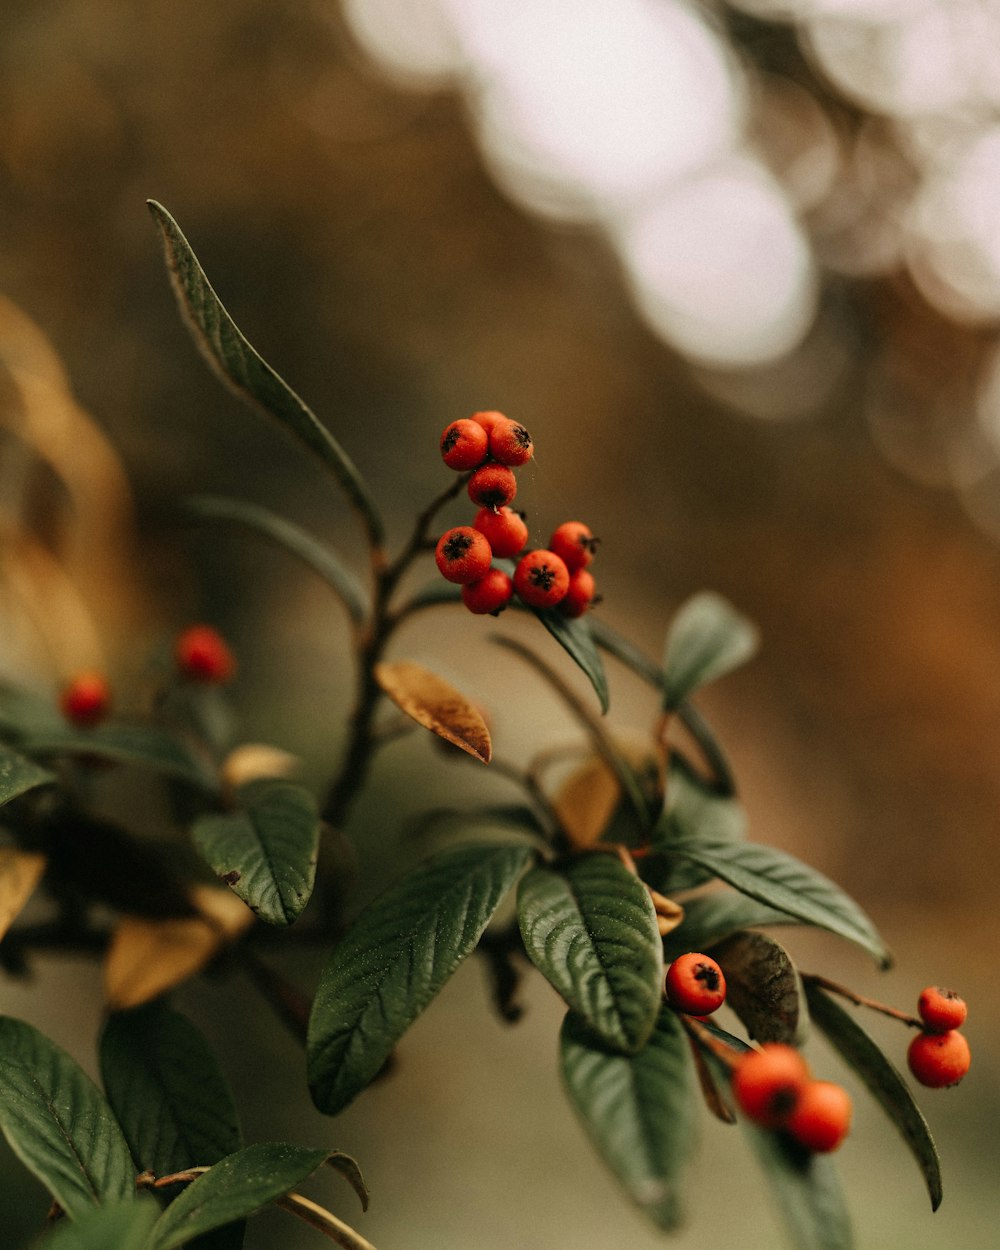 a small branch with red berries on it